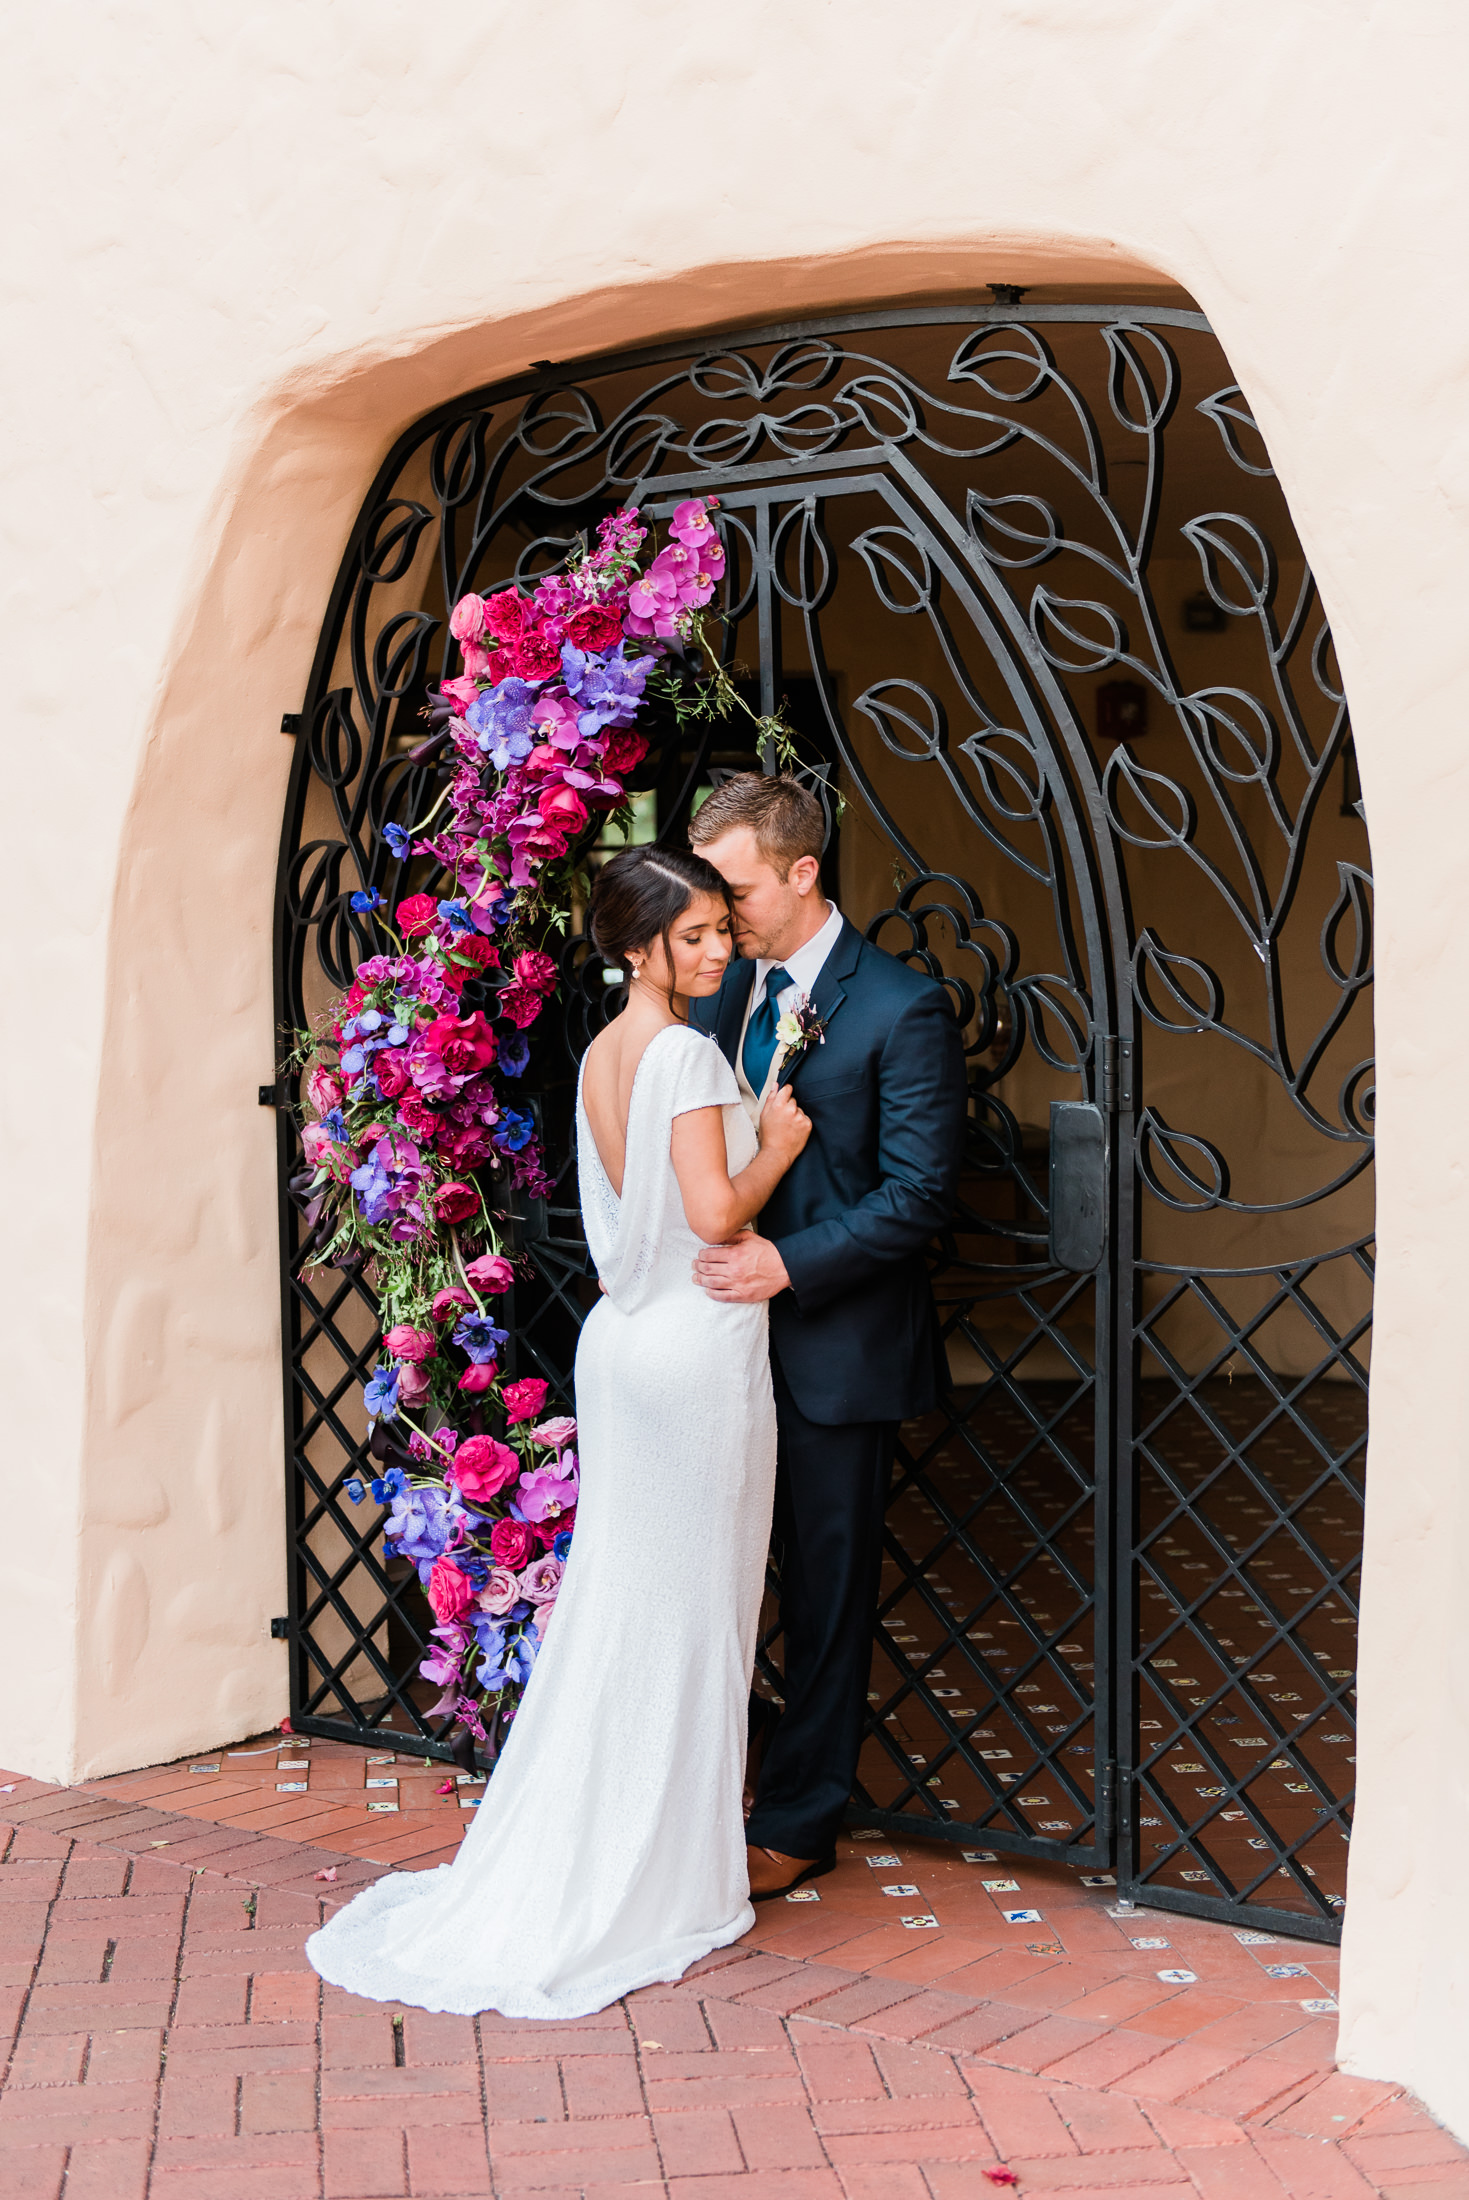 A wedding portrait of a couple under an elaborate floral installation at Curtiss Mansion in Miami Springs, florida